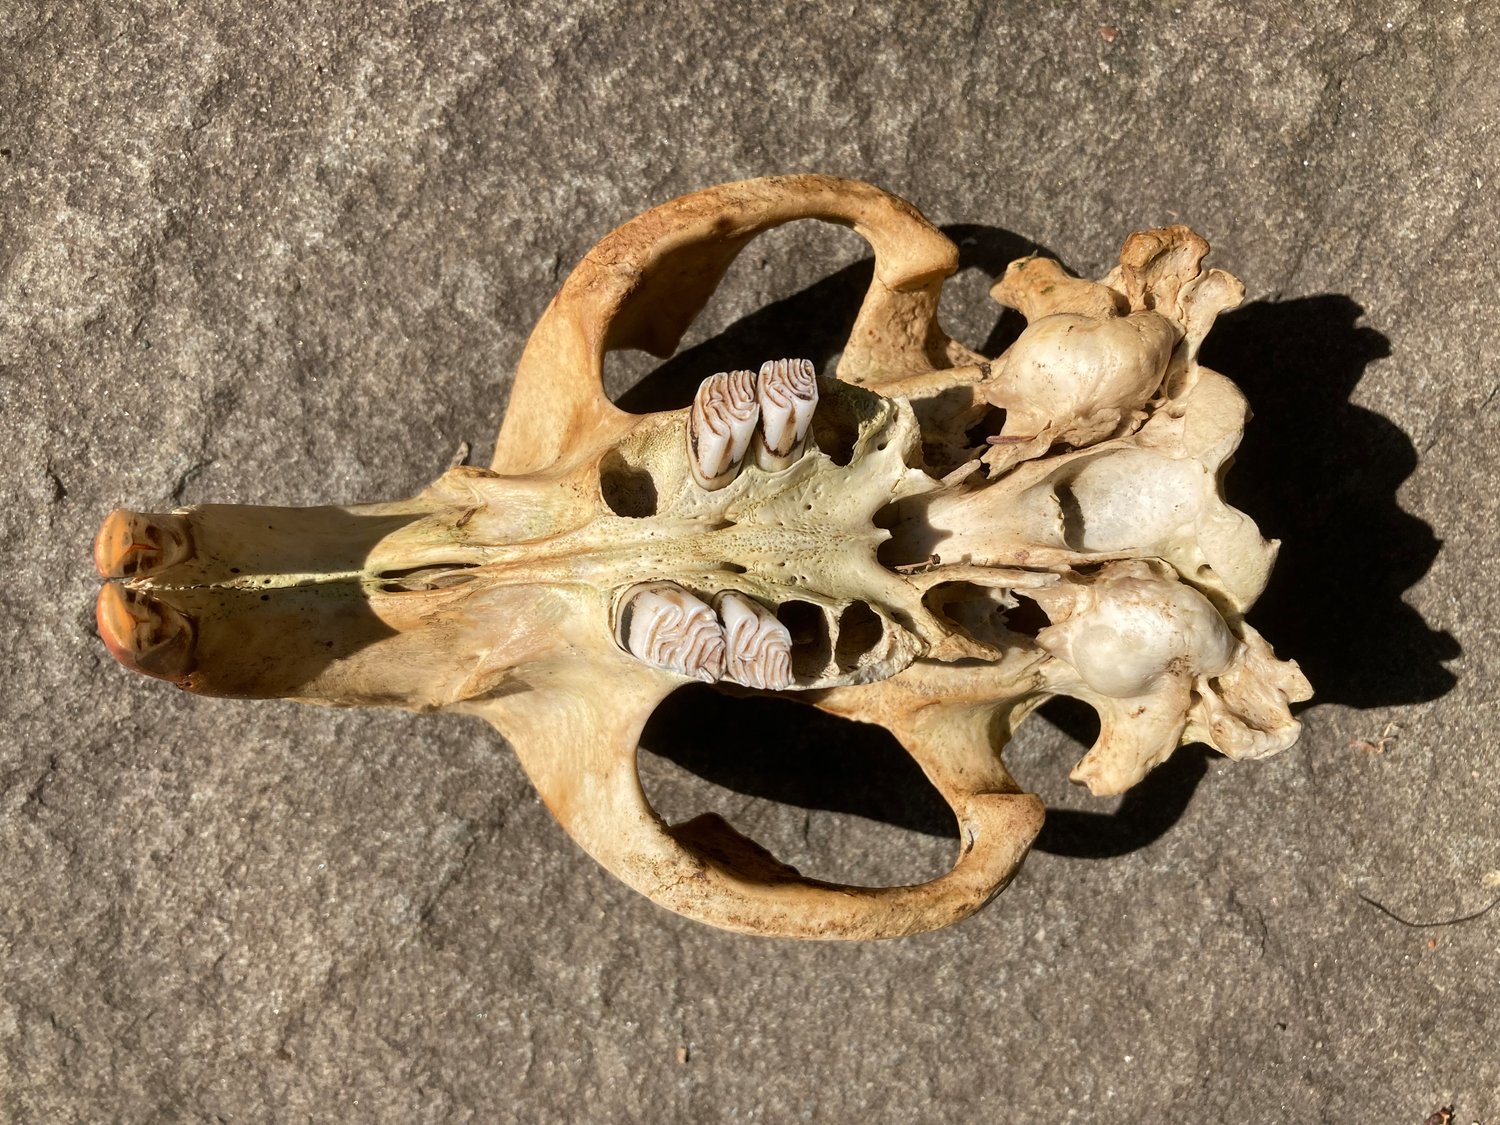 Various views of a beaver skull reveal the prominent incisors that these mammals use to fell trees for constructing dams and lodges and to harvest the inner (cambrium) layer of bark that provides more nourishment to them.